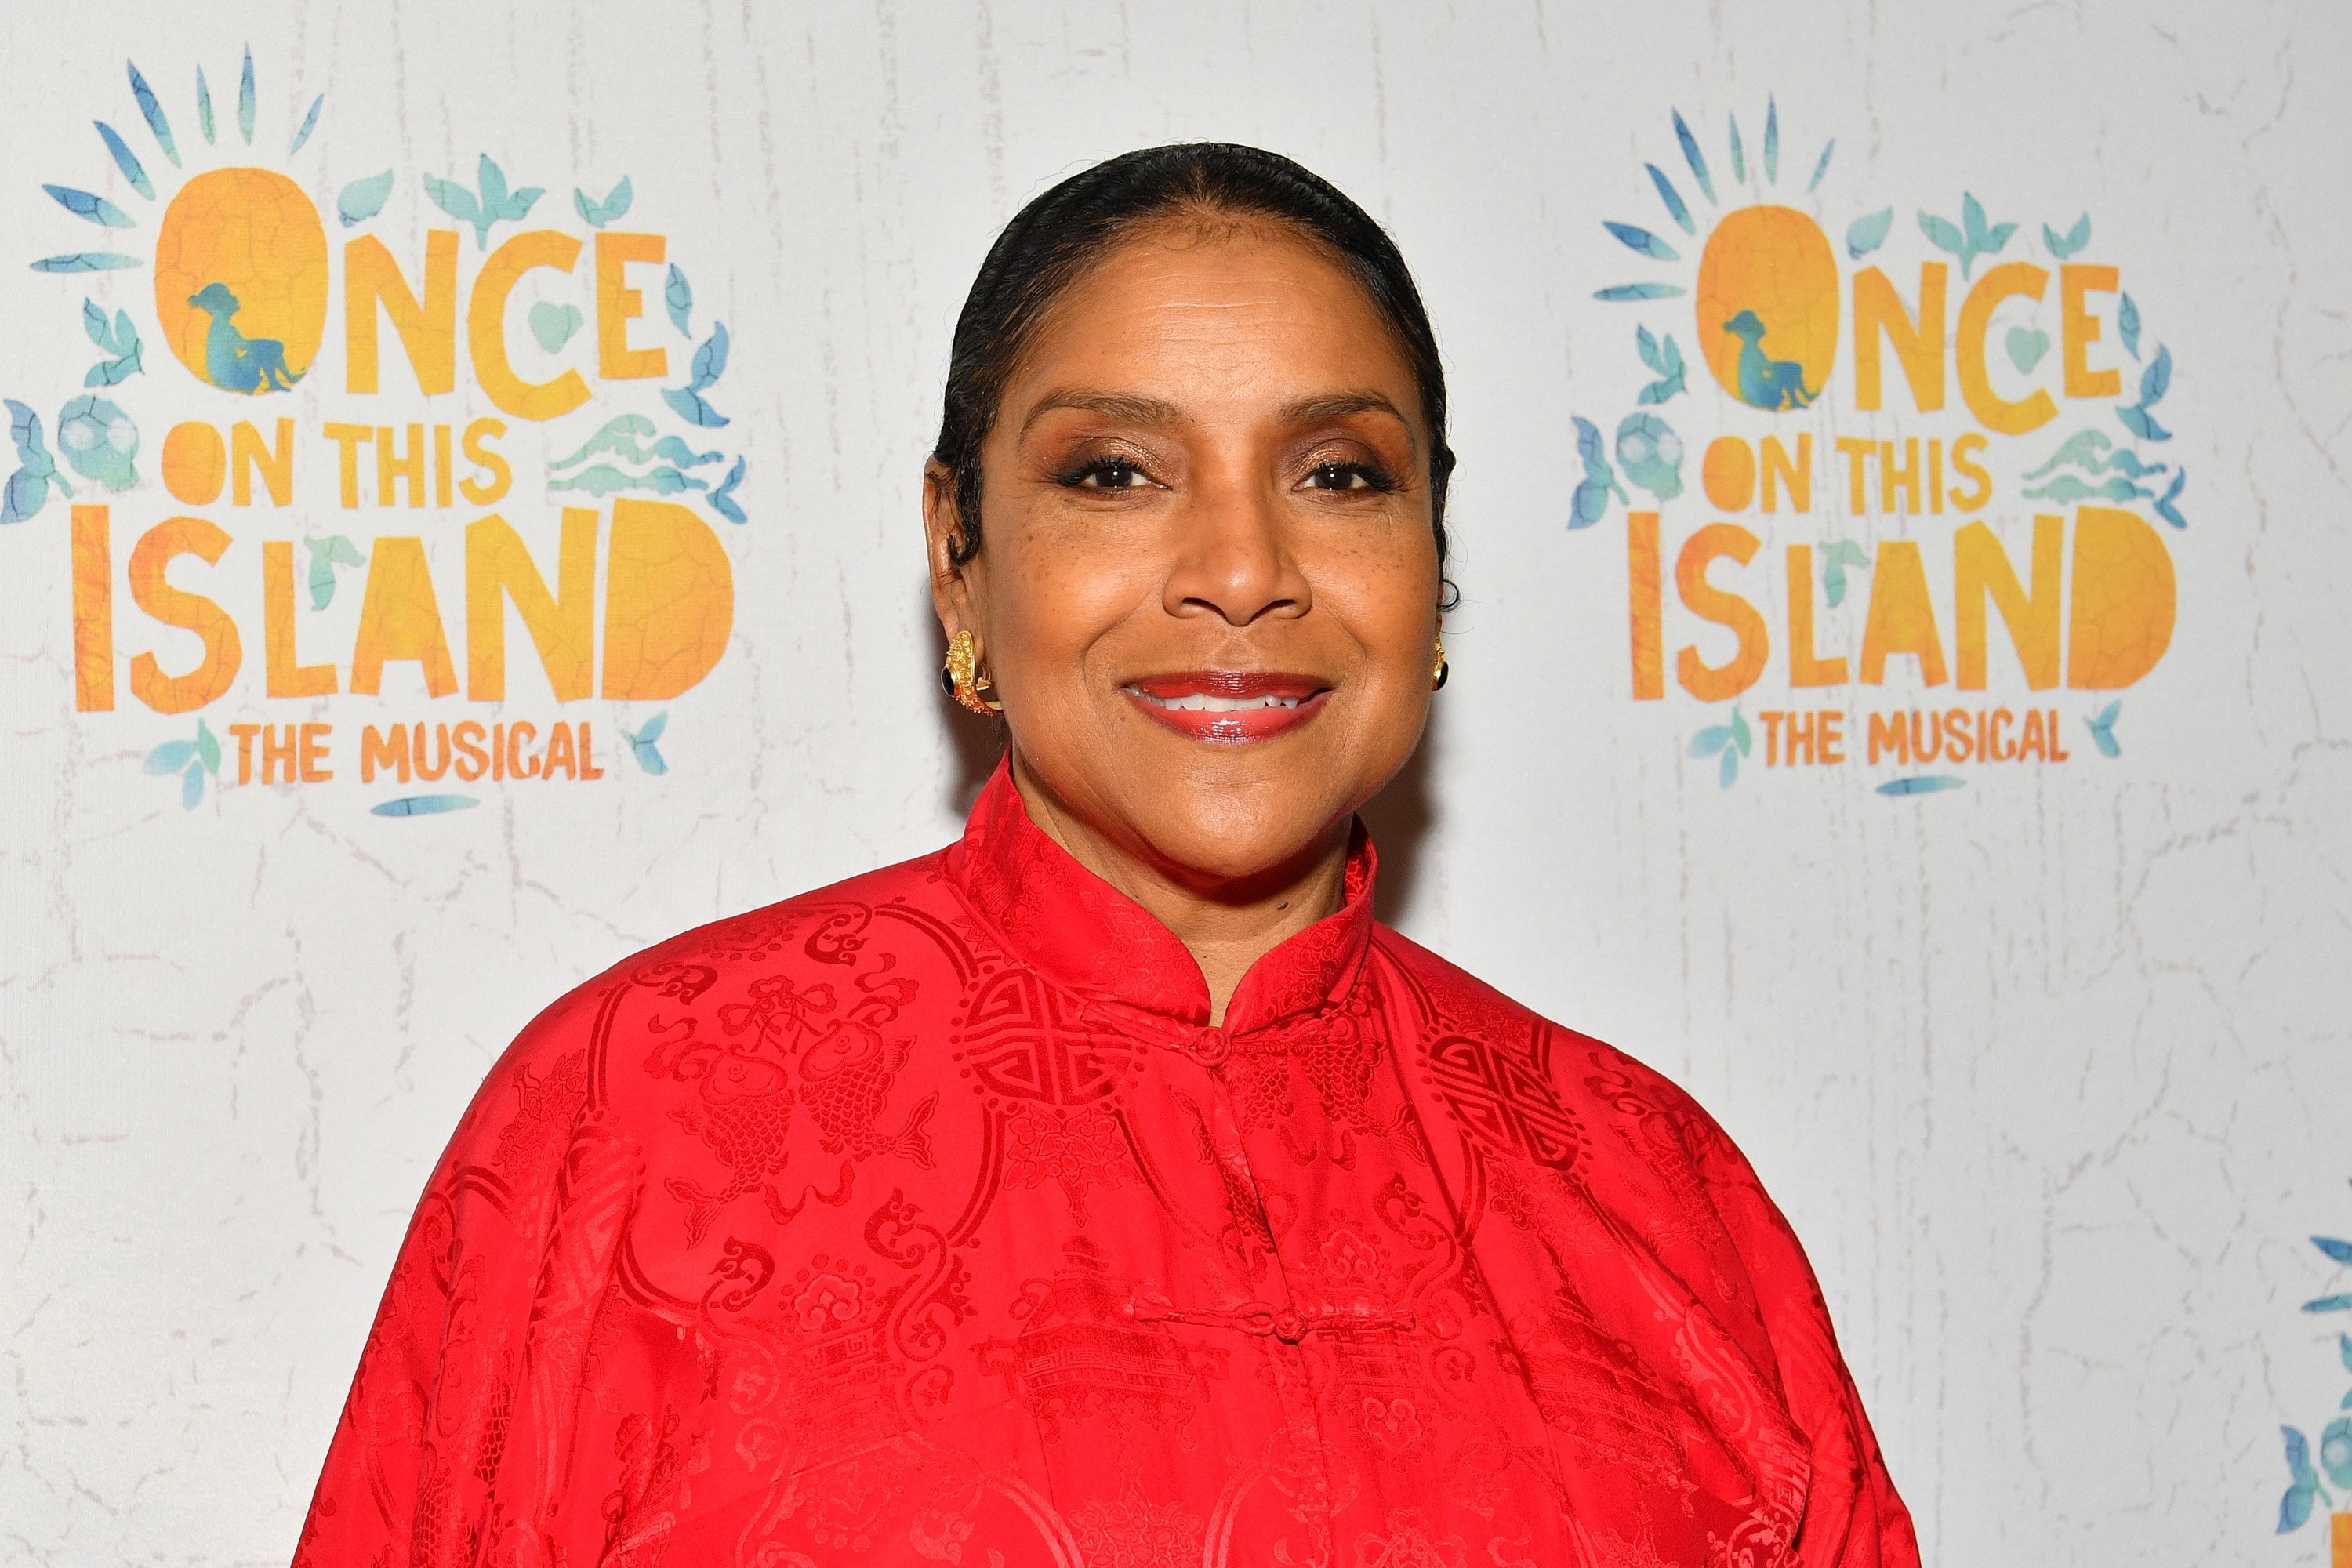 Phylicia Rashad attends the "Once On This Island" Broadway Opening Night at Circle in the Square Theatre on December 3, 2017. | Photo: Getty Images